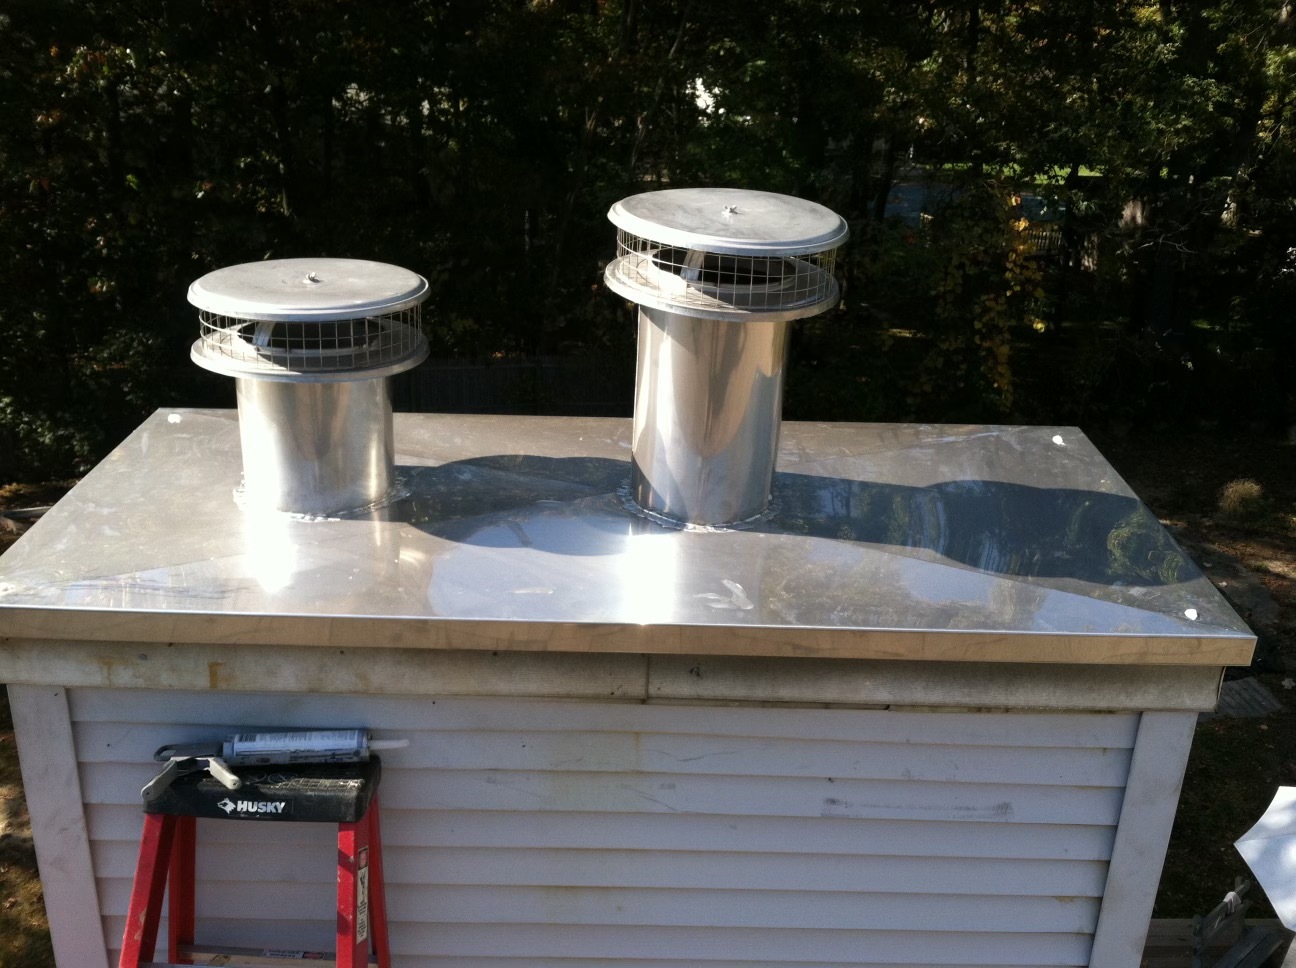 Chimney caps are important for keeping out animals, debris, and water.